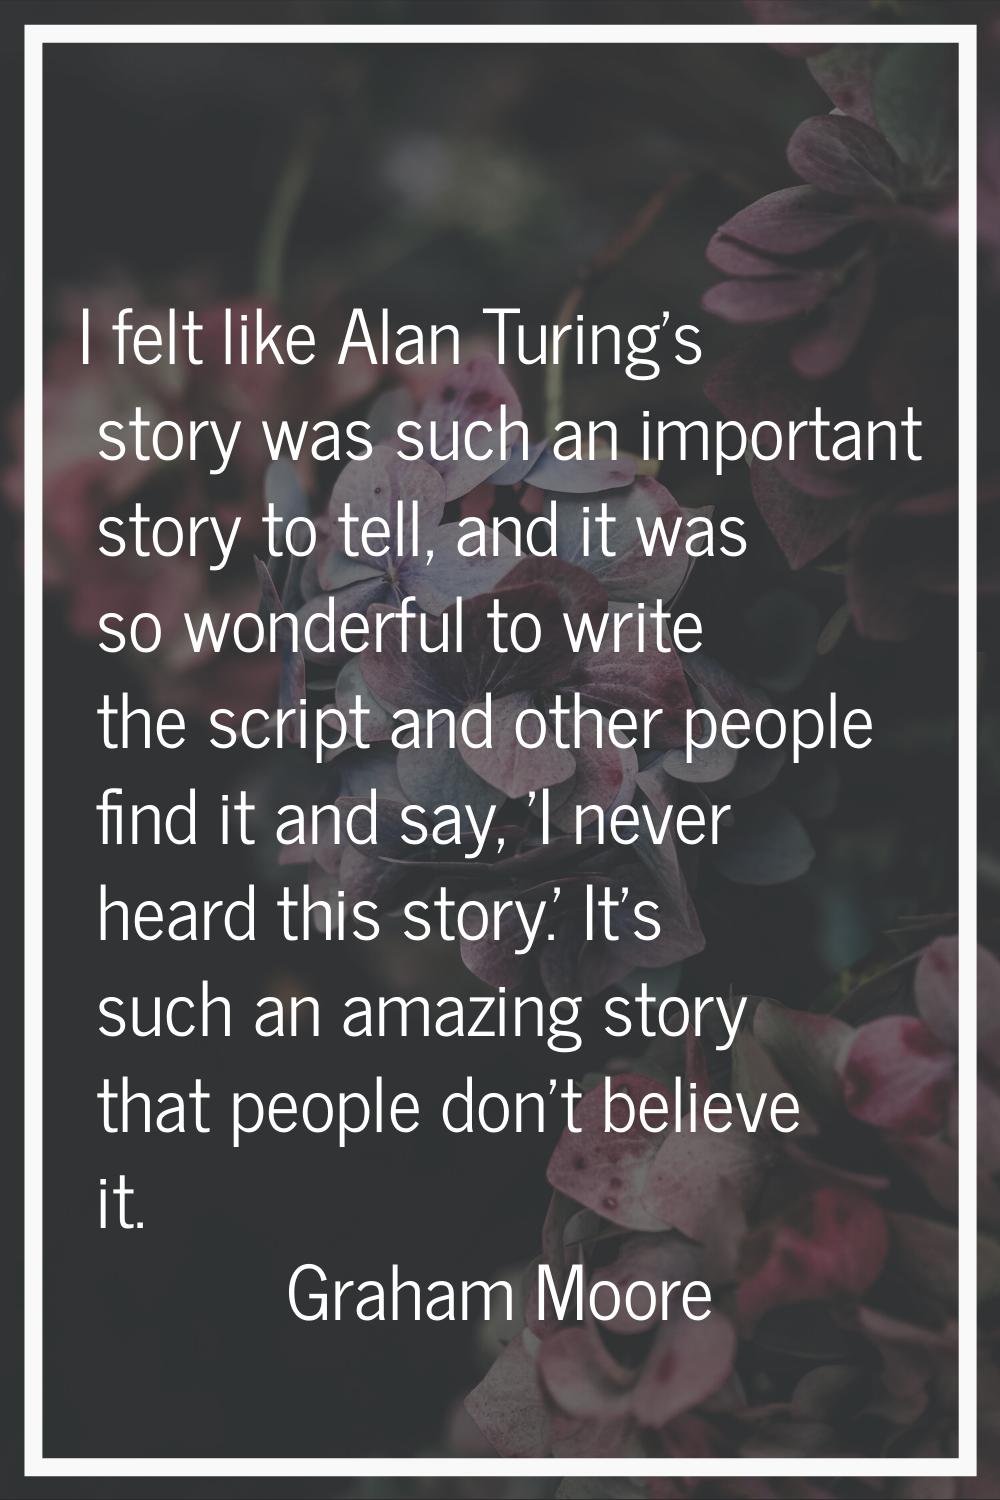 I felt like Alan Turing's story was such an important story to tell, and it was so wonderful to wri